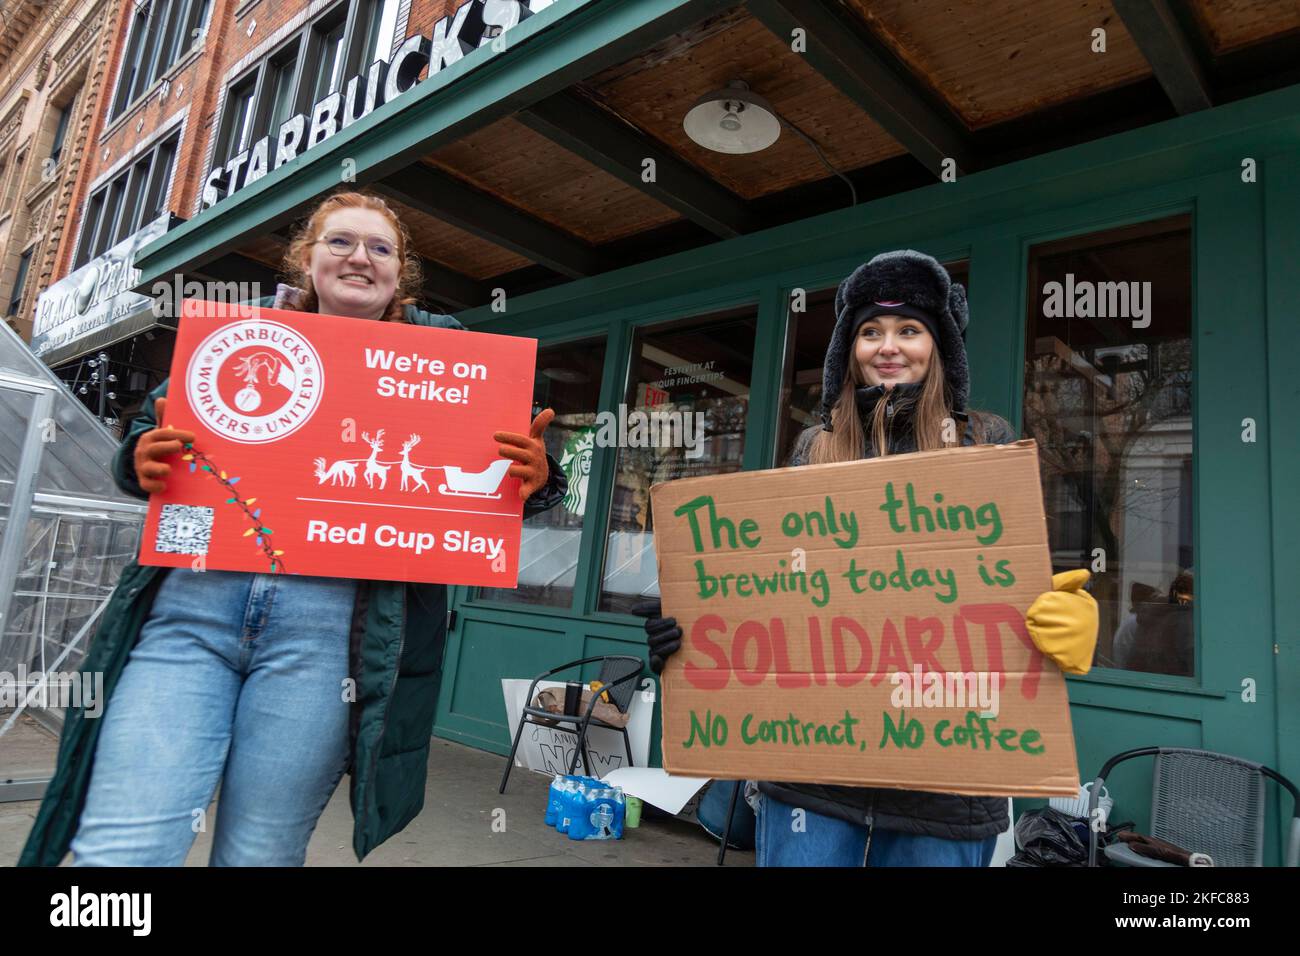 Ann Arbor, Michigan, USA. 17th Nov, 2022. Starbucks workers on strike at a Starbucks Coffee shop. Workers at this store were among more than 100 stores nationwide participating in an unfair labor practice strike over inadequate staffing on the company's Red Cup Day. They are members of the Starbucks Workers United union. Credit: Jim West/Alamy Live News Stock Photo